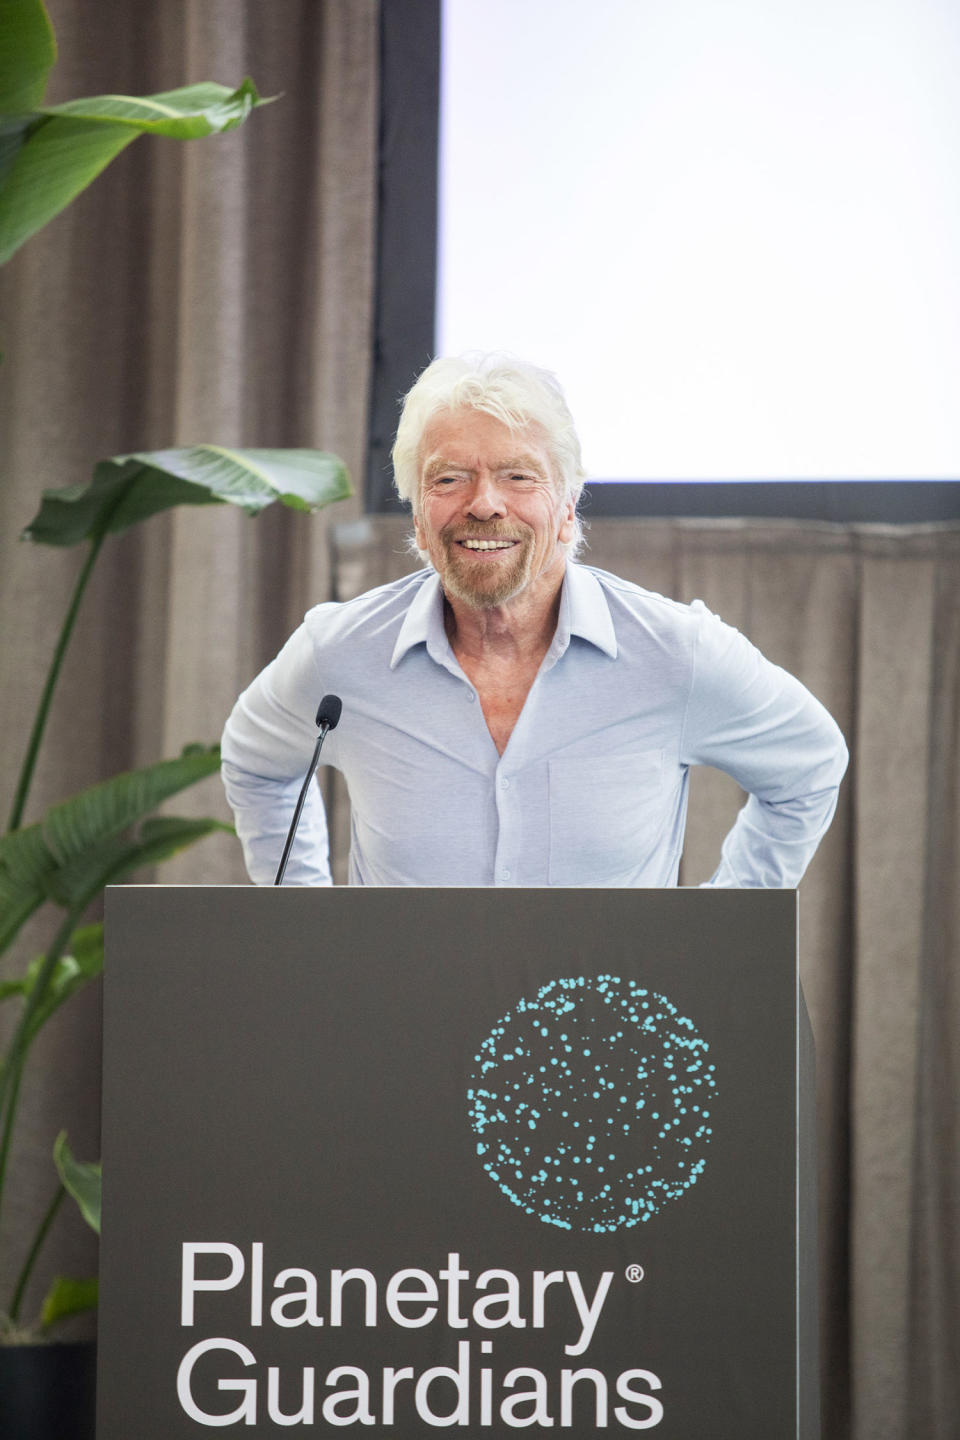 Richard Branson announces the launch of Planetary Guardians while at his flagship Virgin Hotel in Manhattan on Monday, Sept. 18, 2023. (Christopher Farber / Virgin)